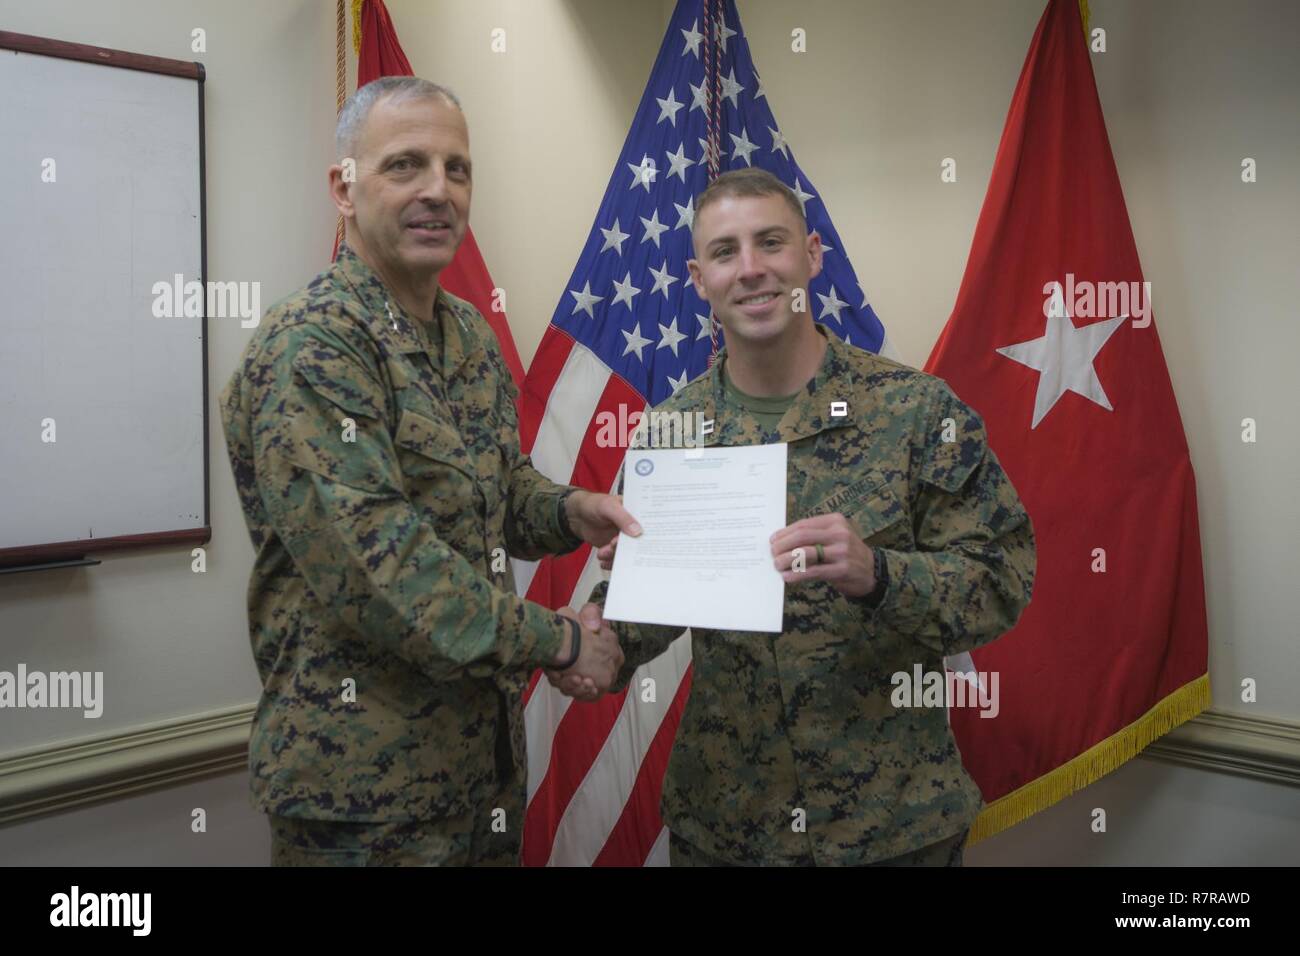 U.S. Marine Corps Lt. Gen. Michael G. Dana, deputy commandant, Installation and Logistics poses for a photo with Capt. Sean R. Wetherill, logistics officer, 1st Battalion 7th Marines at the Pentagon, Arlington, Va., March 23, 2017. Wetherill received the FY-16 1st Lt. Travis Manion Memorial Marine Corps Logistics Officer of the year award. Stock Photo